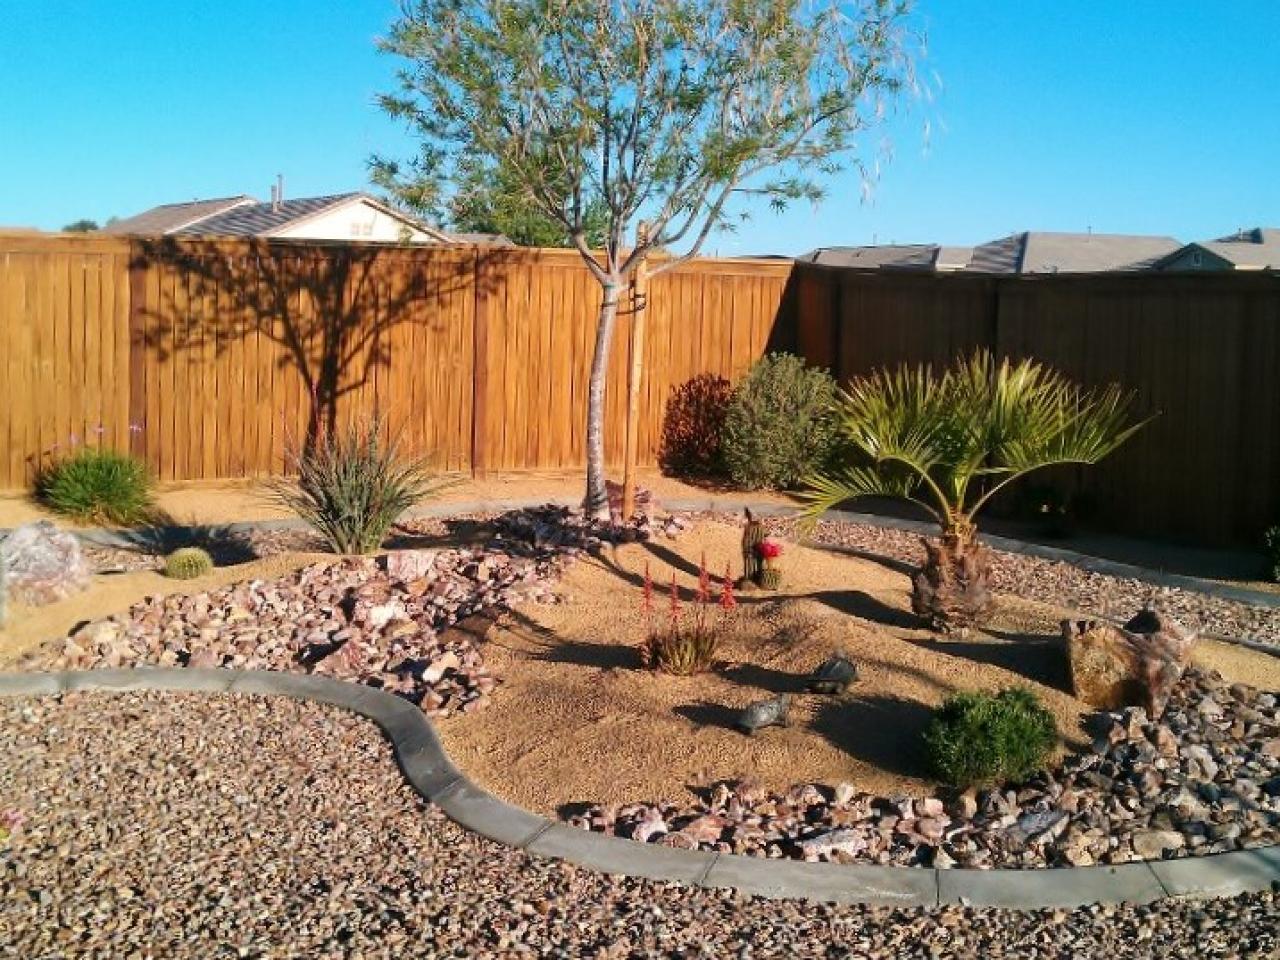 What is most cost-effective for landscaping?